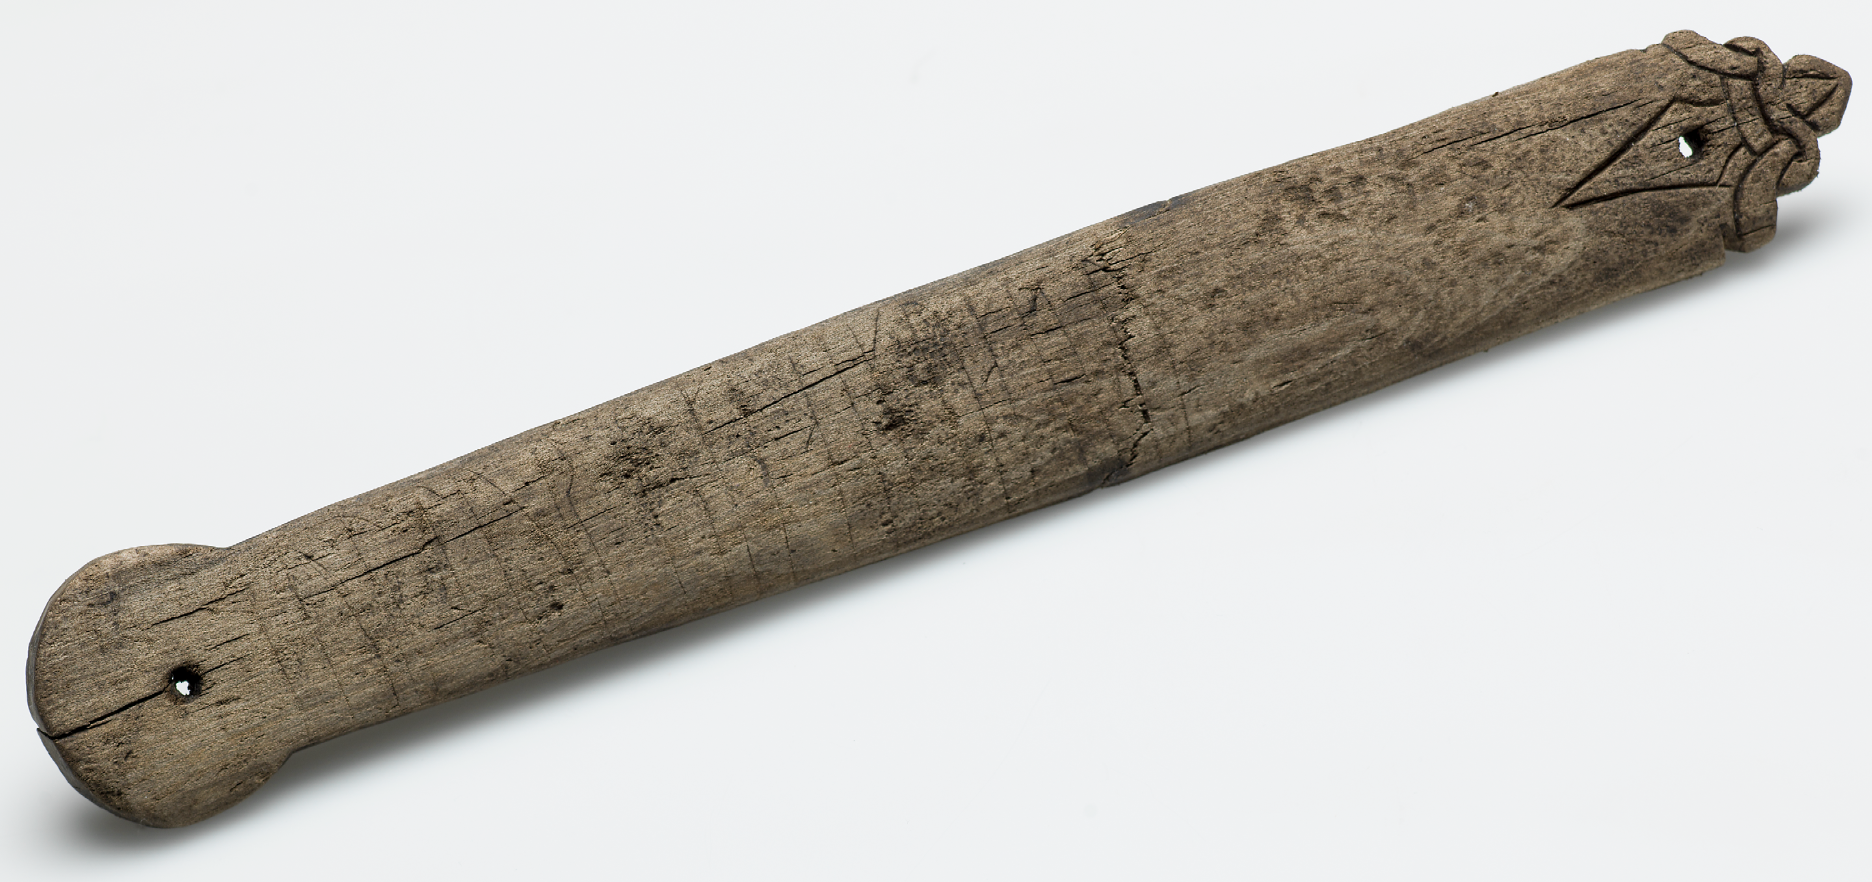 Runic inscription N-32395 from Trondheim (Norway)